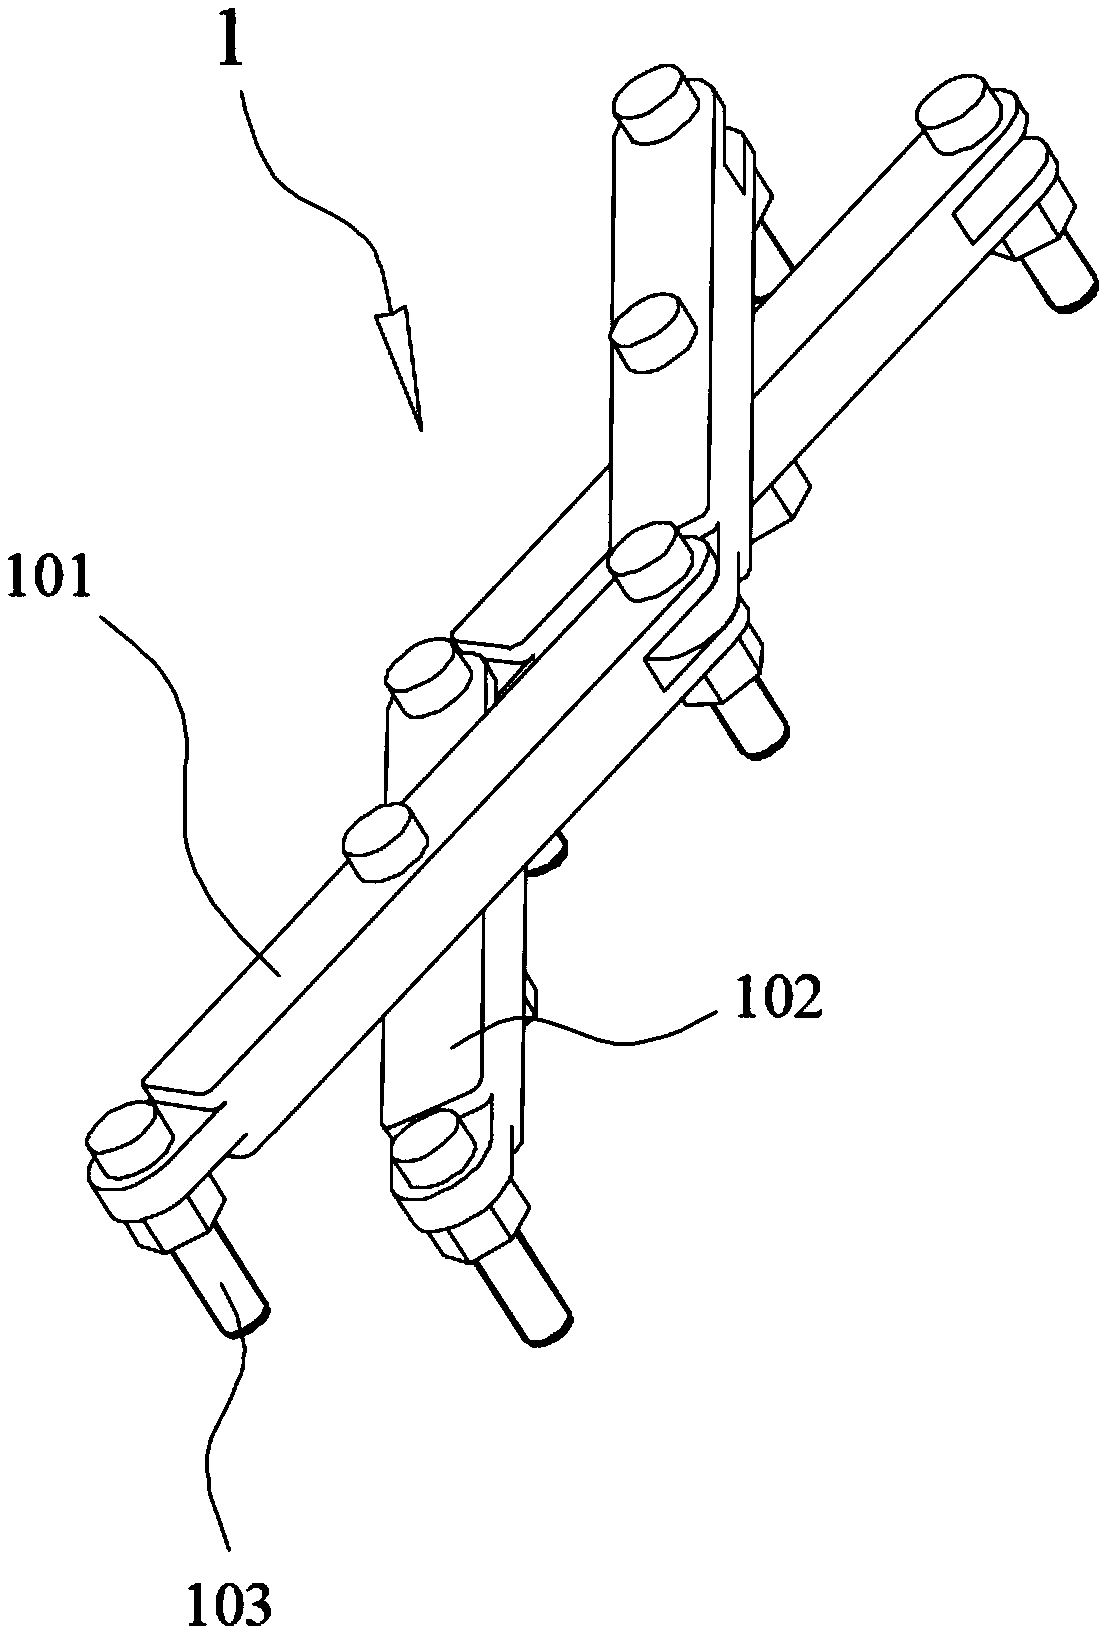 Large-stroke actuator based on dielectric elastomer drive